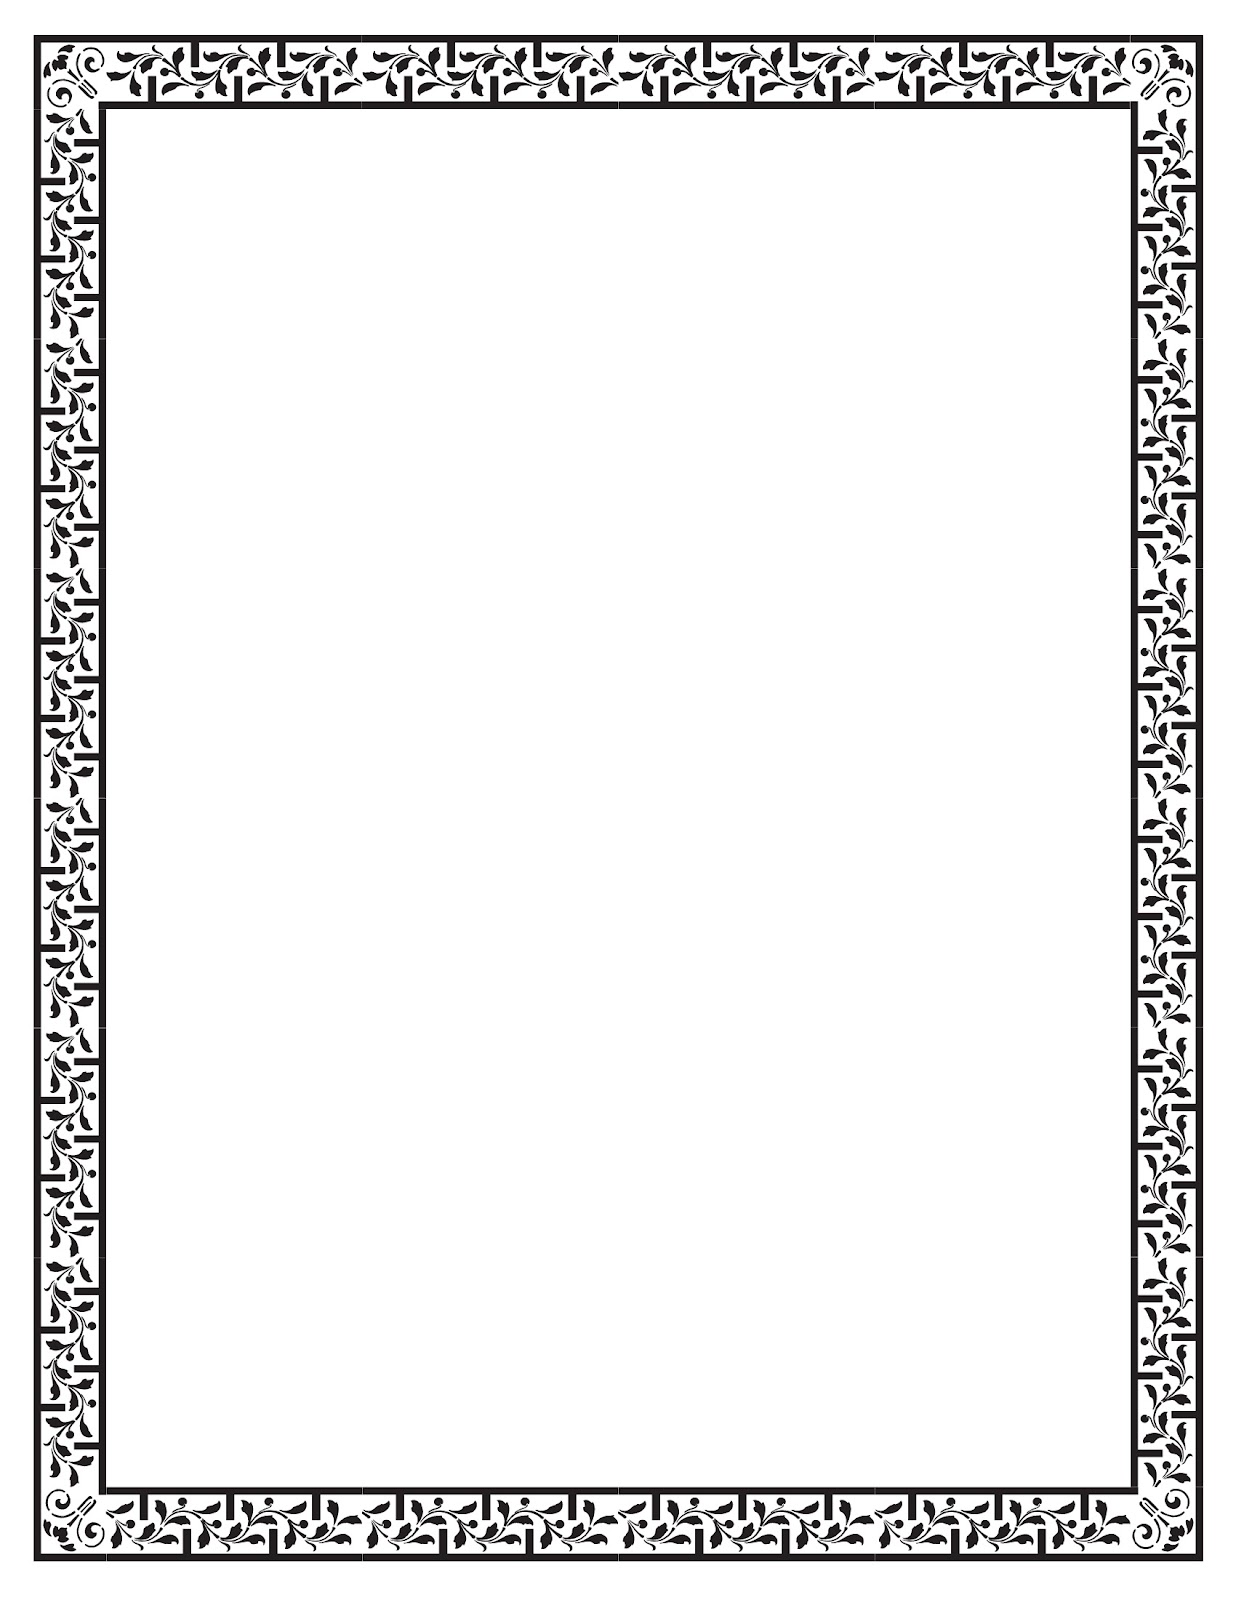 clipart picture frames free download - photo #36